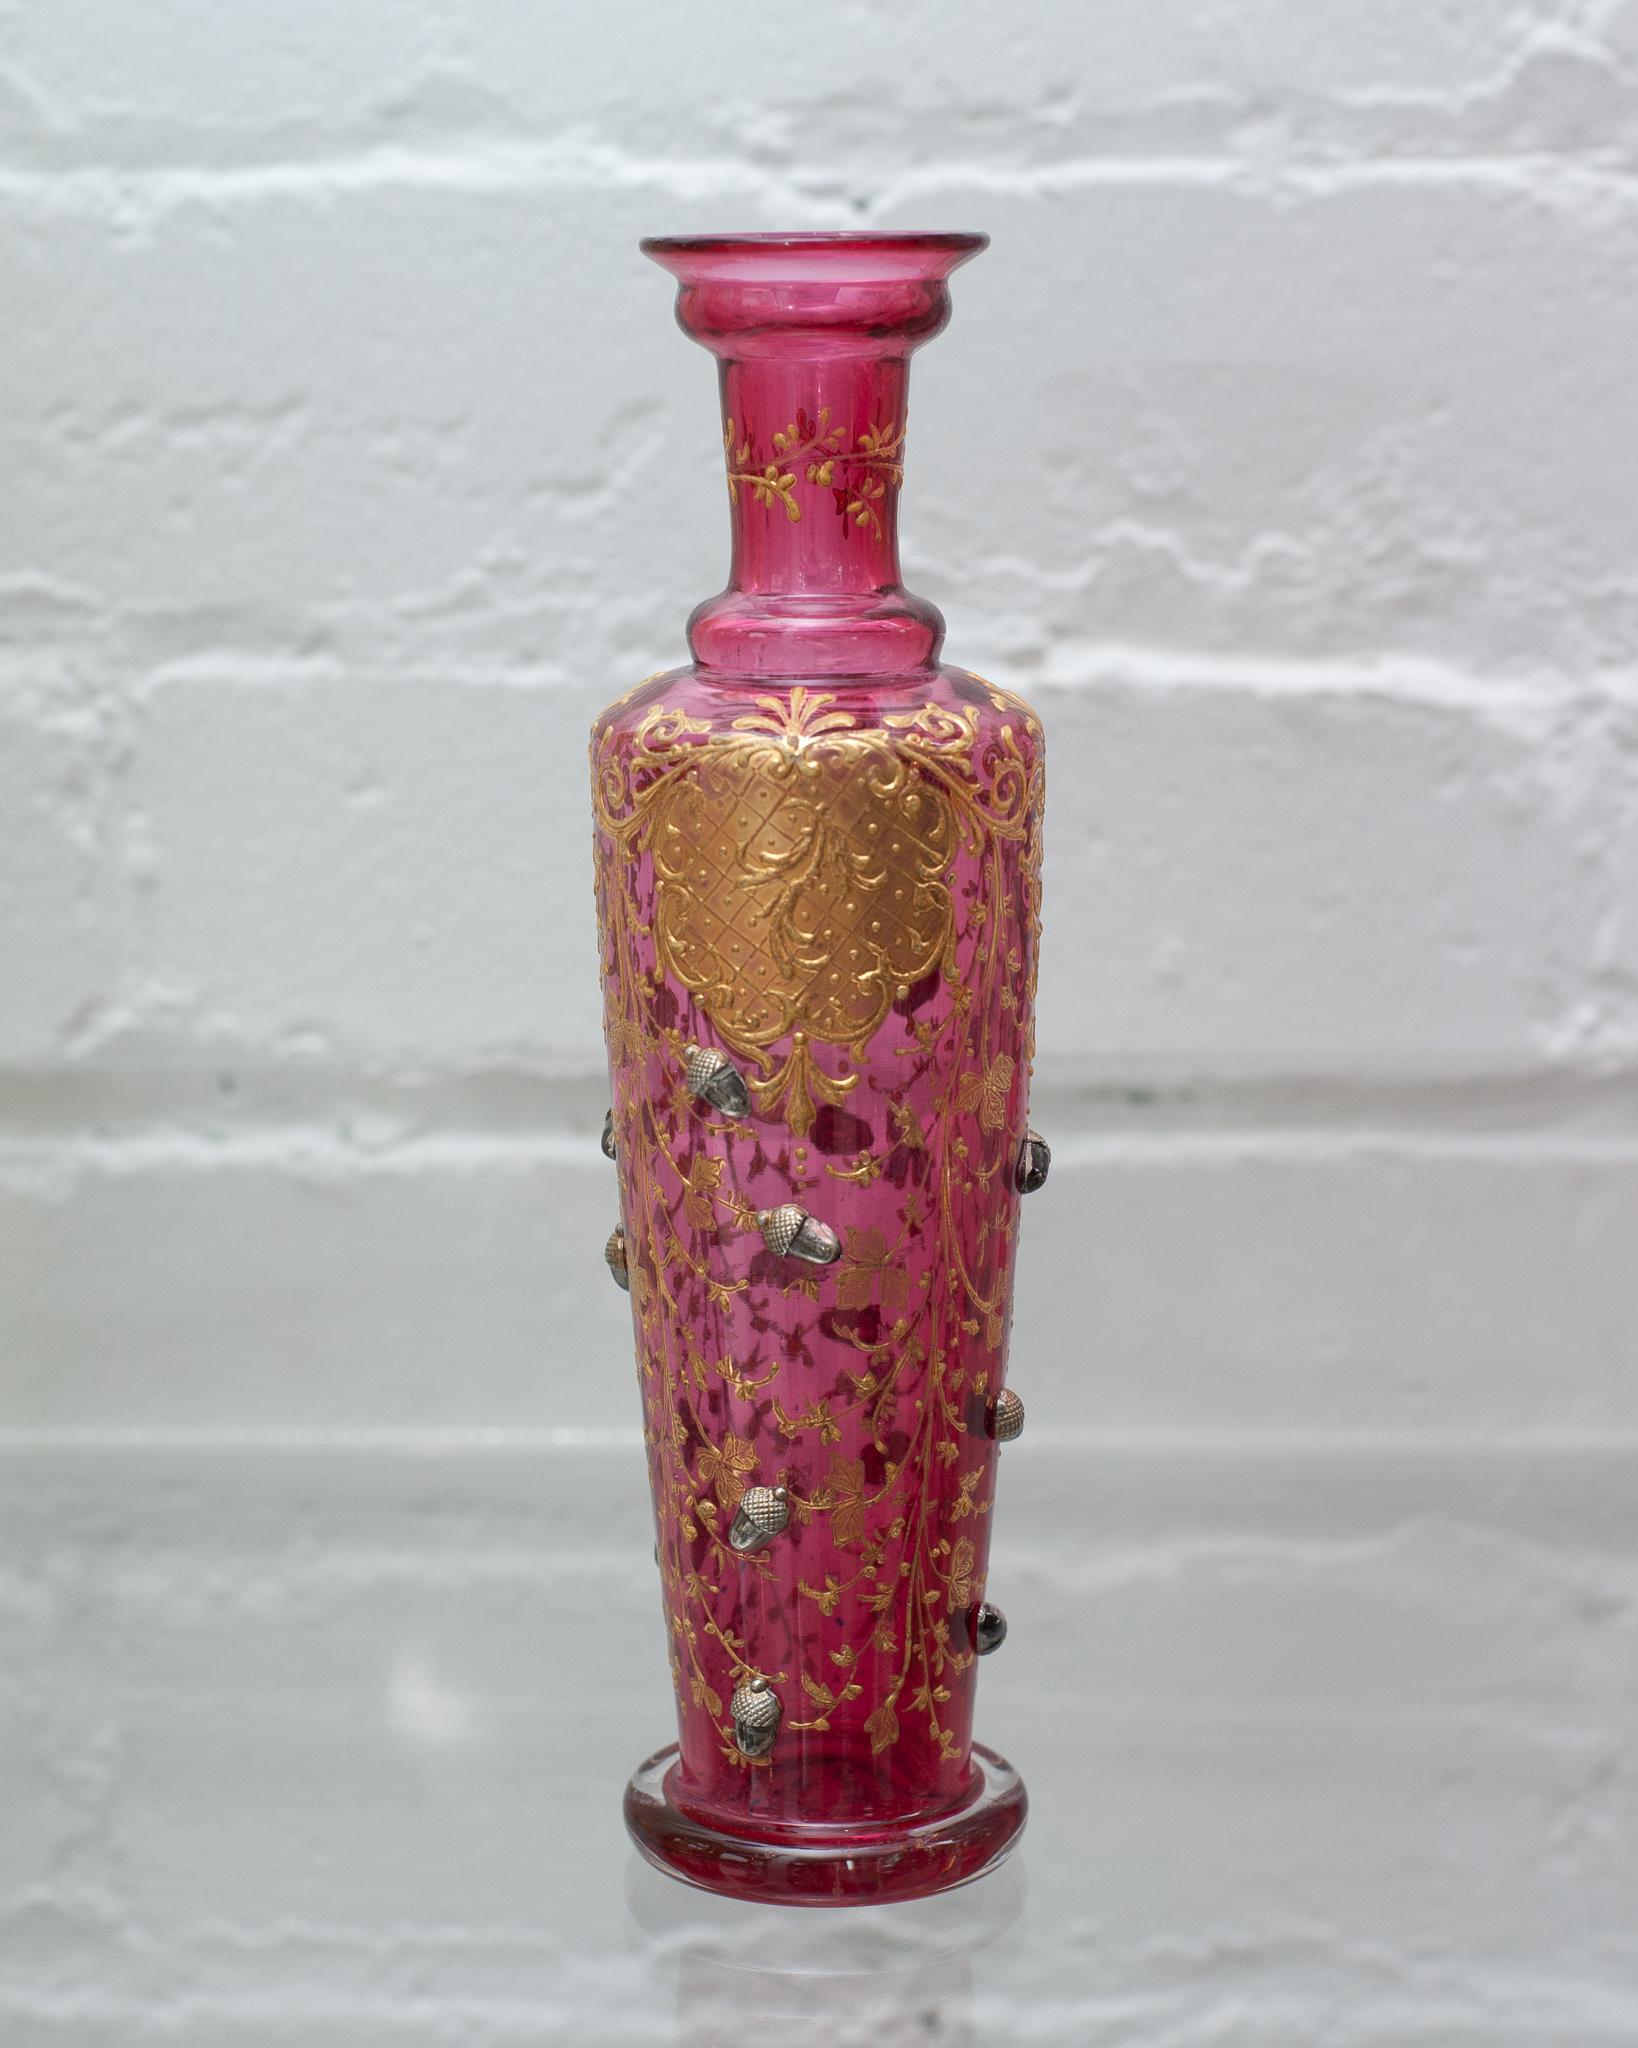 A beautiful and ornate antique Moser cranberry bud vase, with gilded details and acorn motifs. Perfect for a single bloom, this bud vase is as beautiful filled as it is empty.